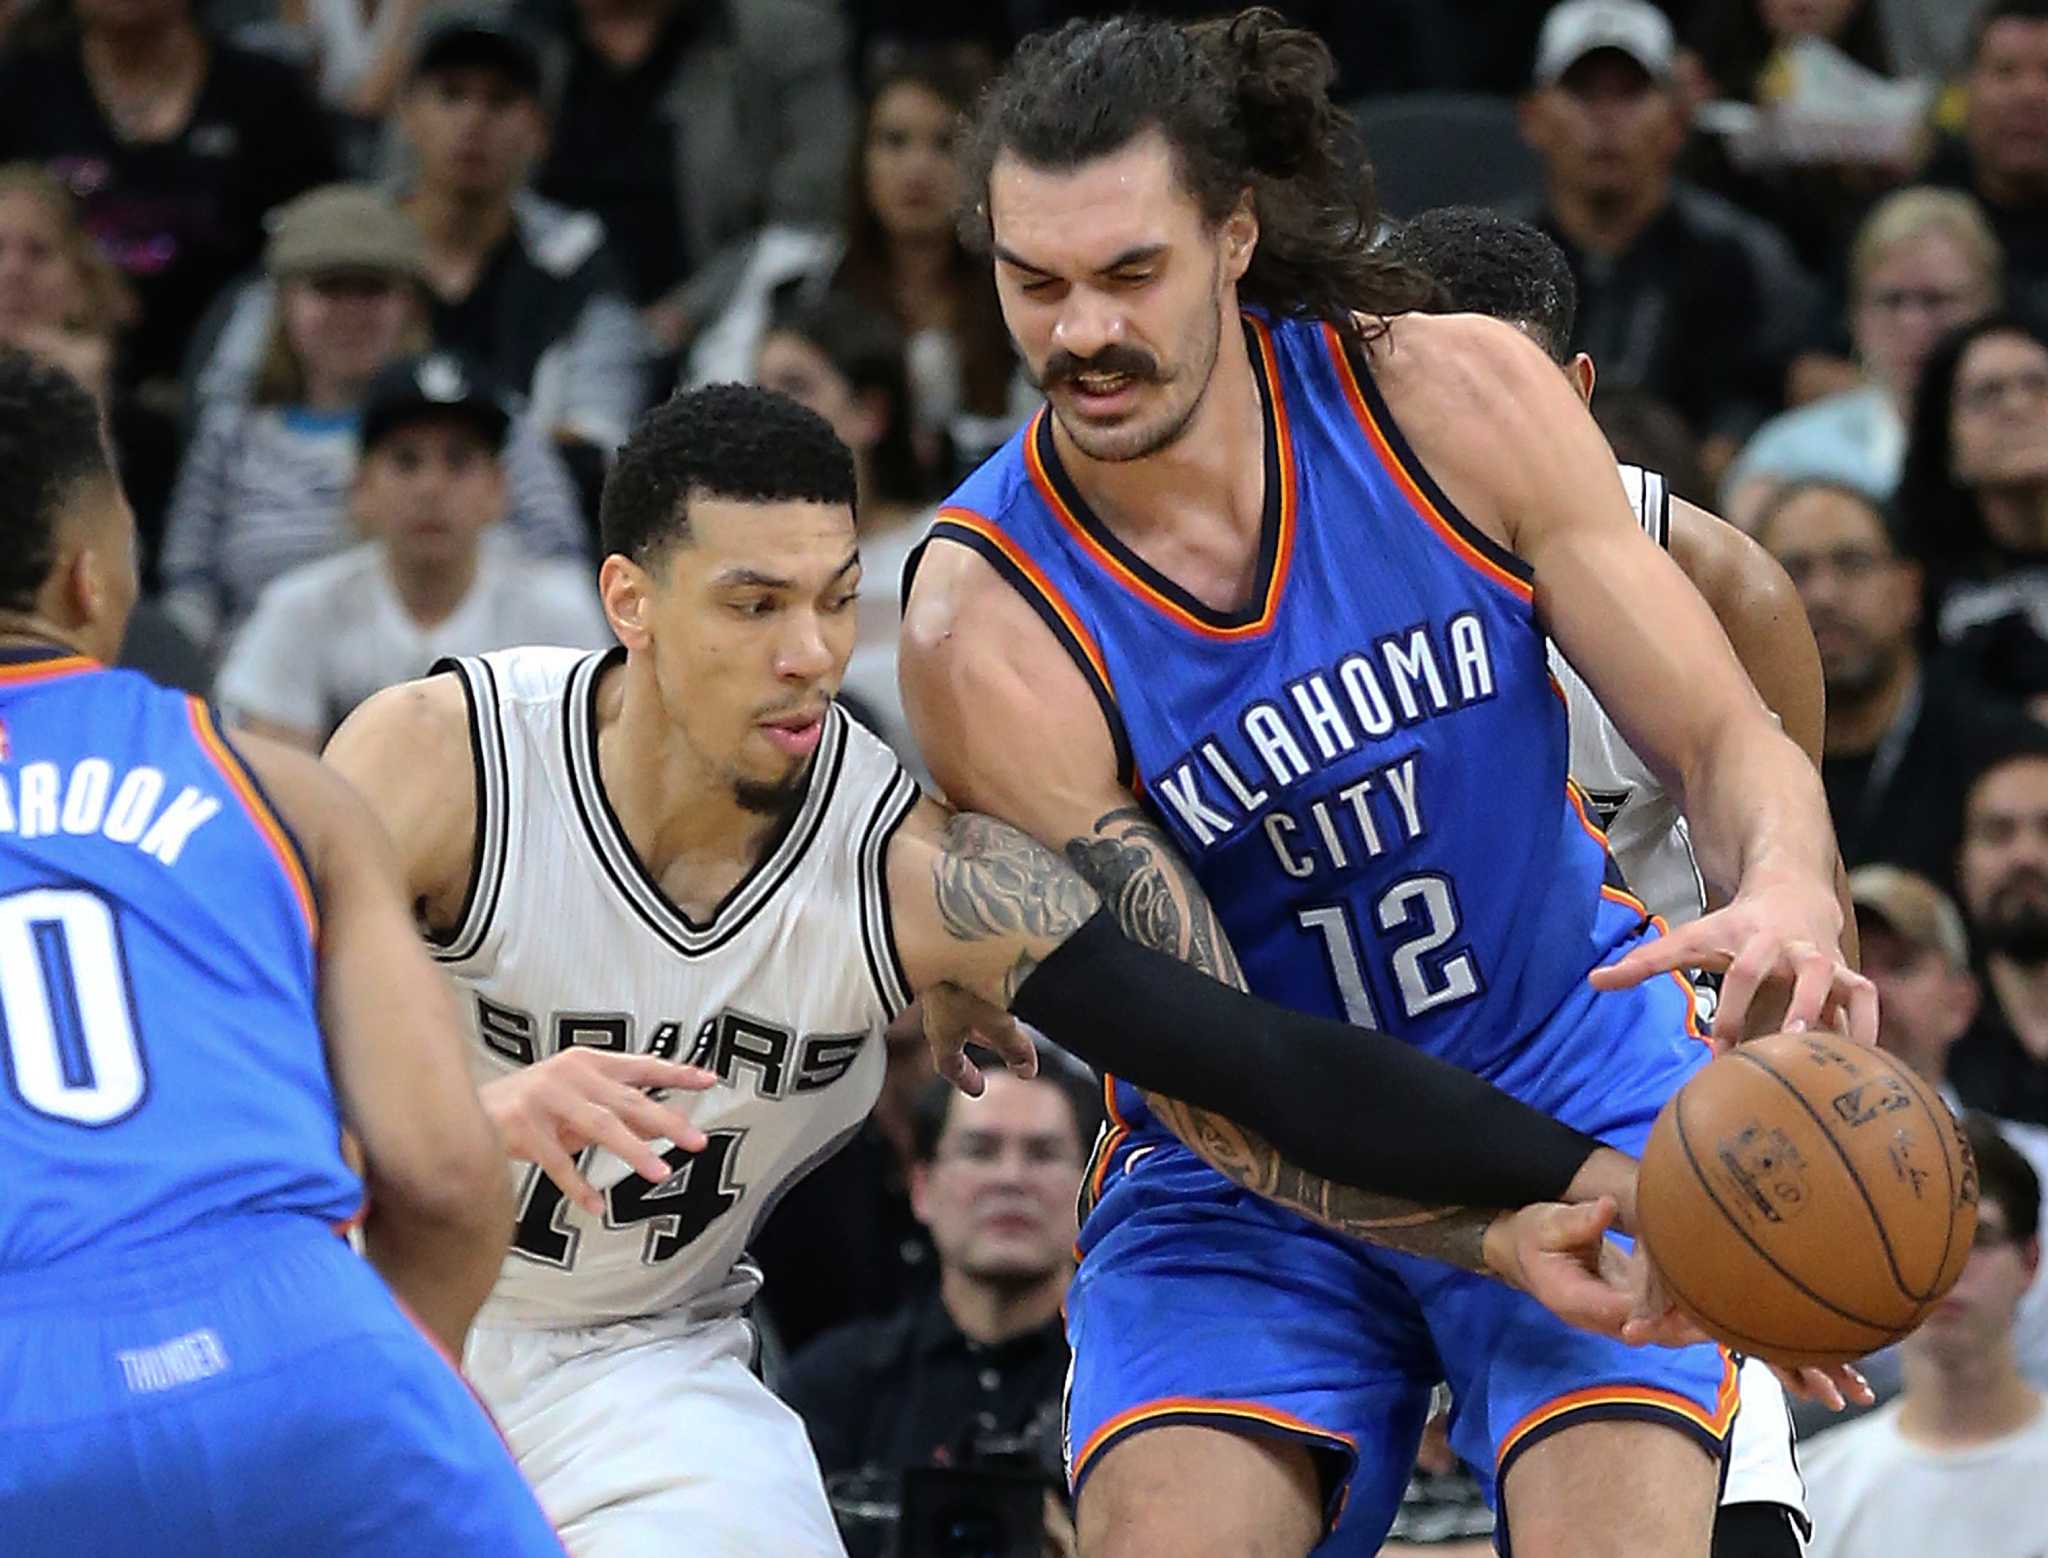 Steven Adams to play in front of Thunder fans for 1st time since trade